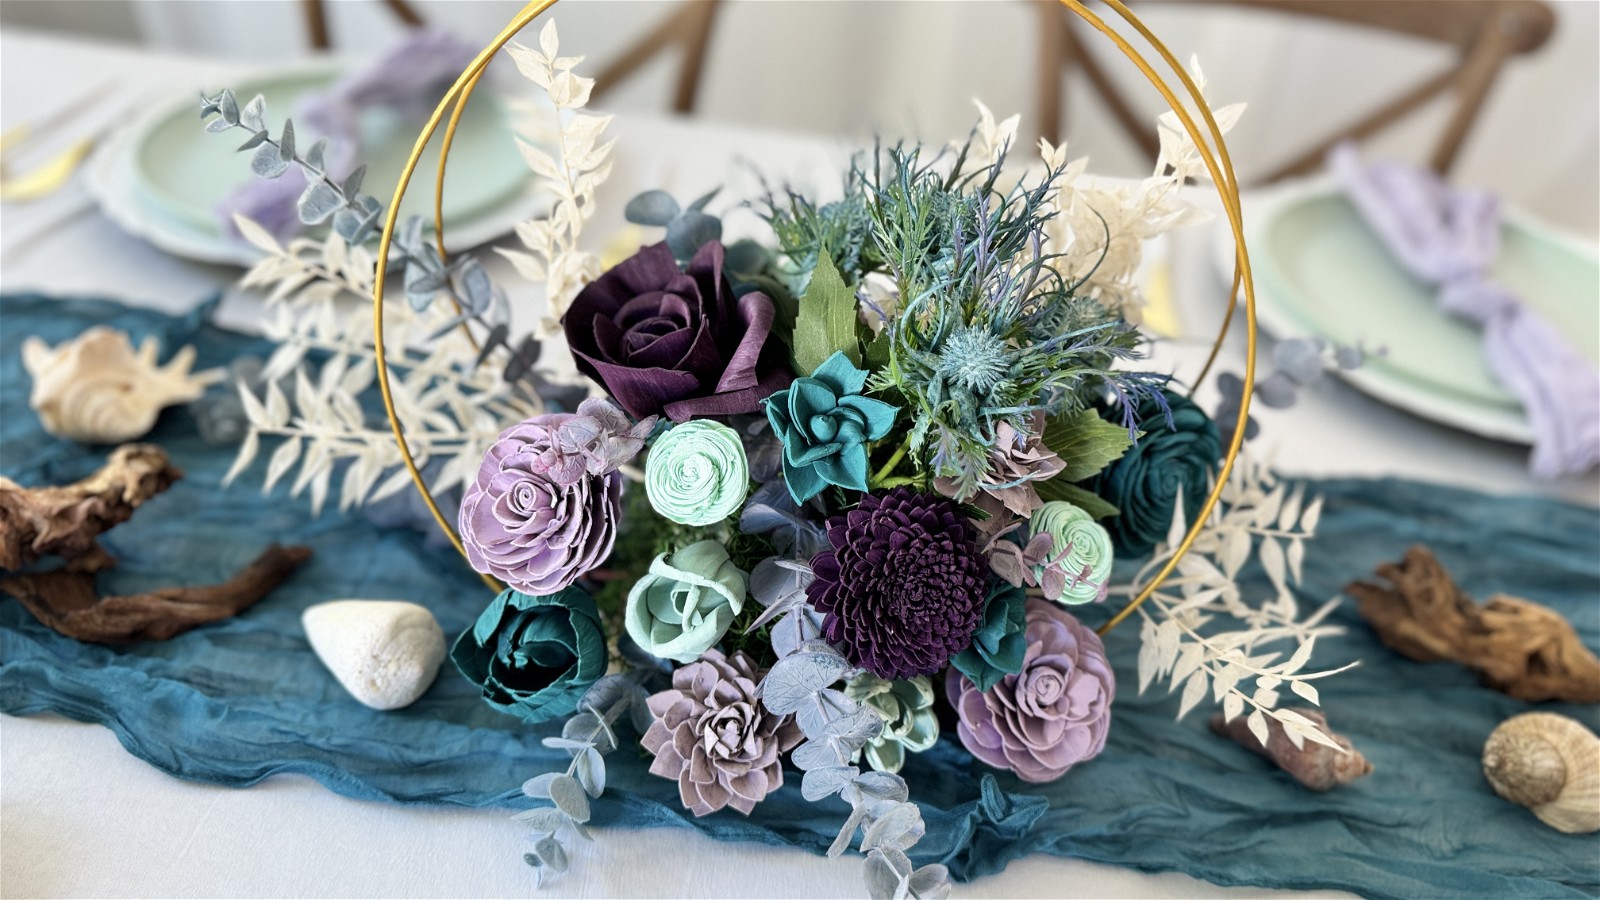 A Step By Step Guide to Choose Your Wedding Color Palette – Ling's Moment